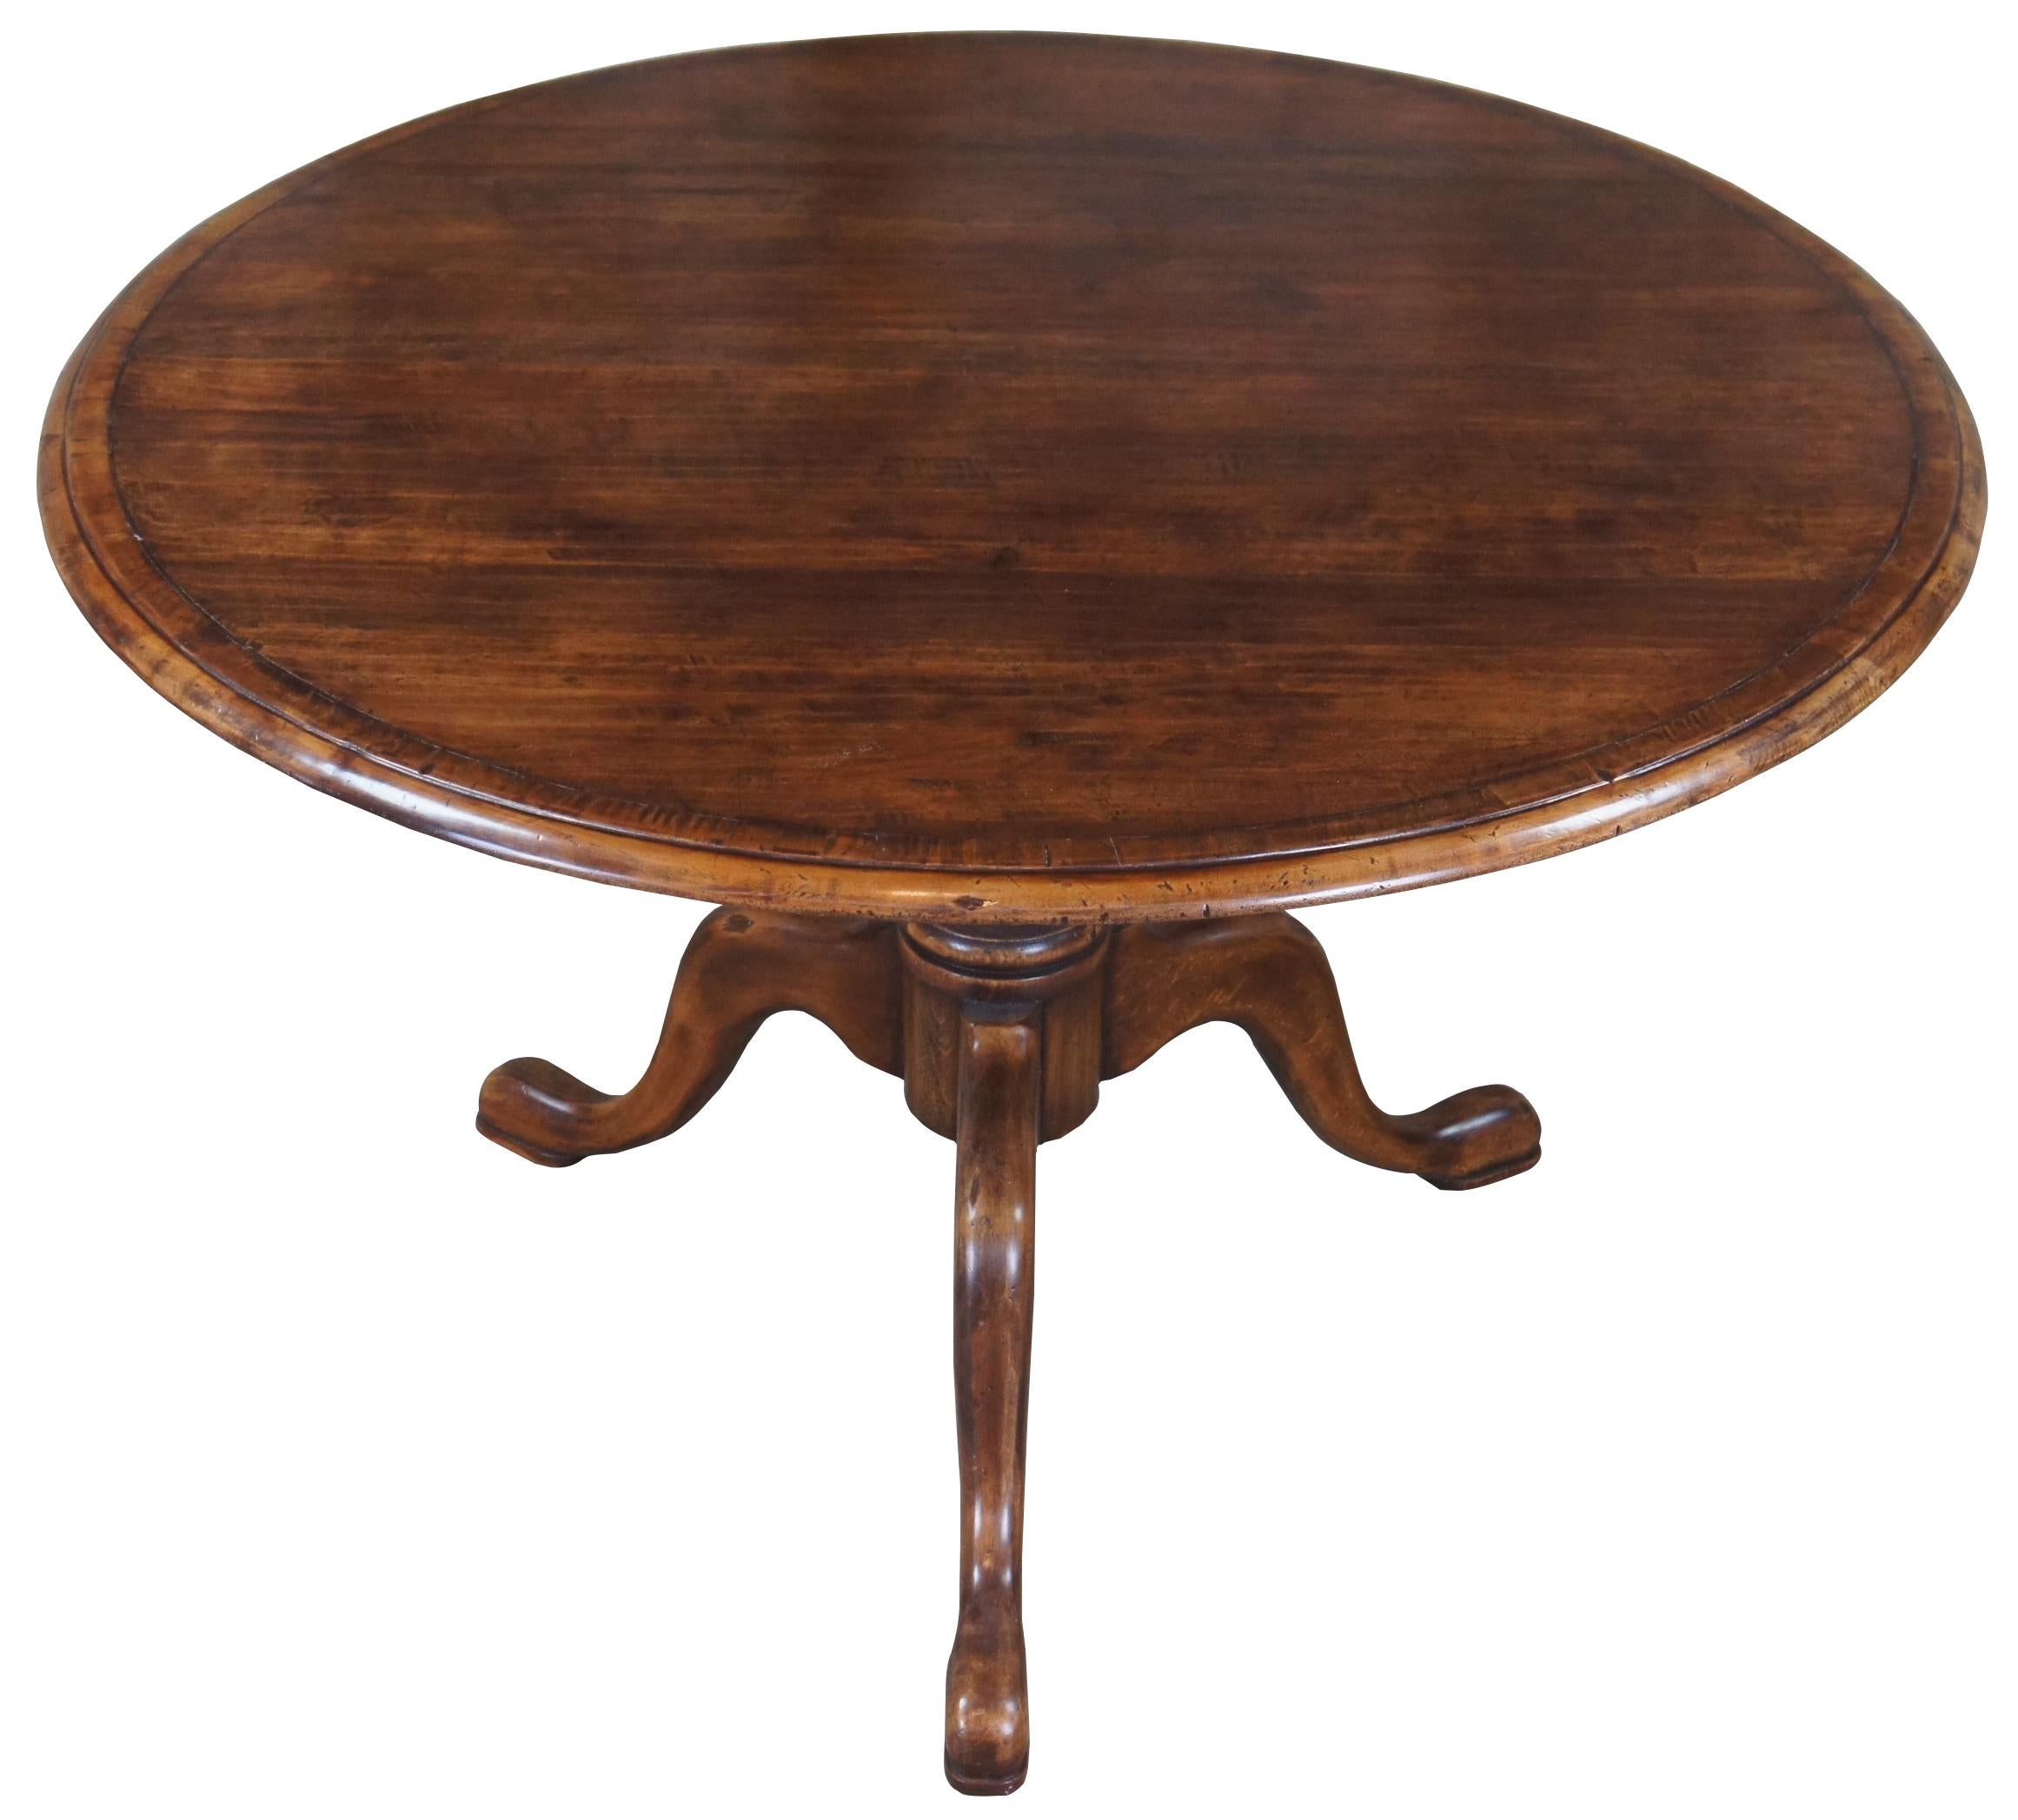 Late 20th century mahogany dining table. A round form top with ogee edge and baluster base with three legs leading to pad feet. Measure: 48